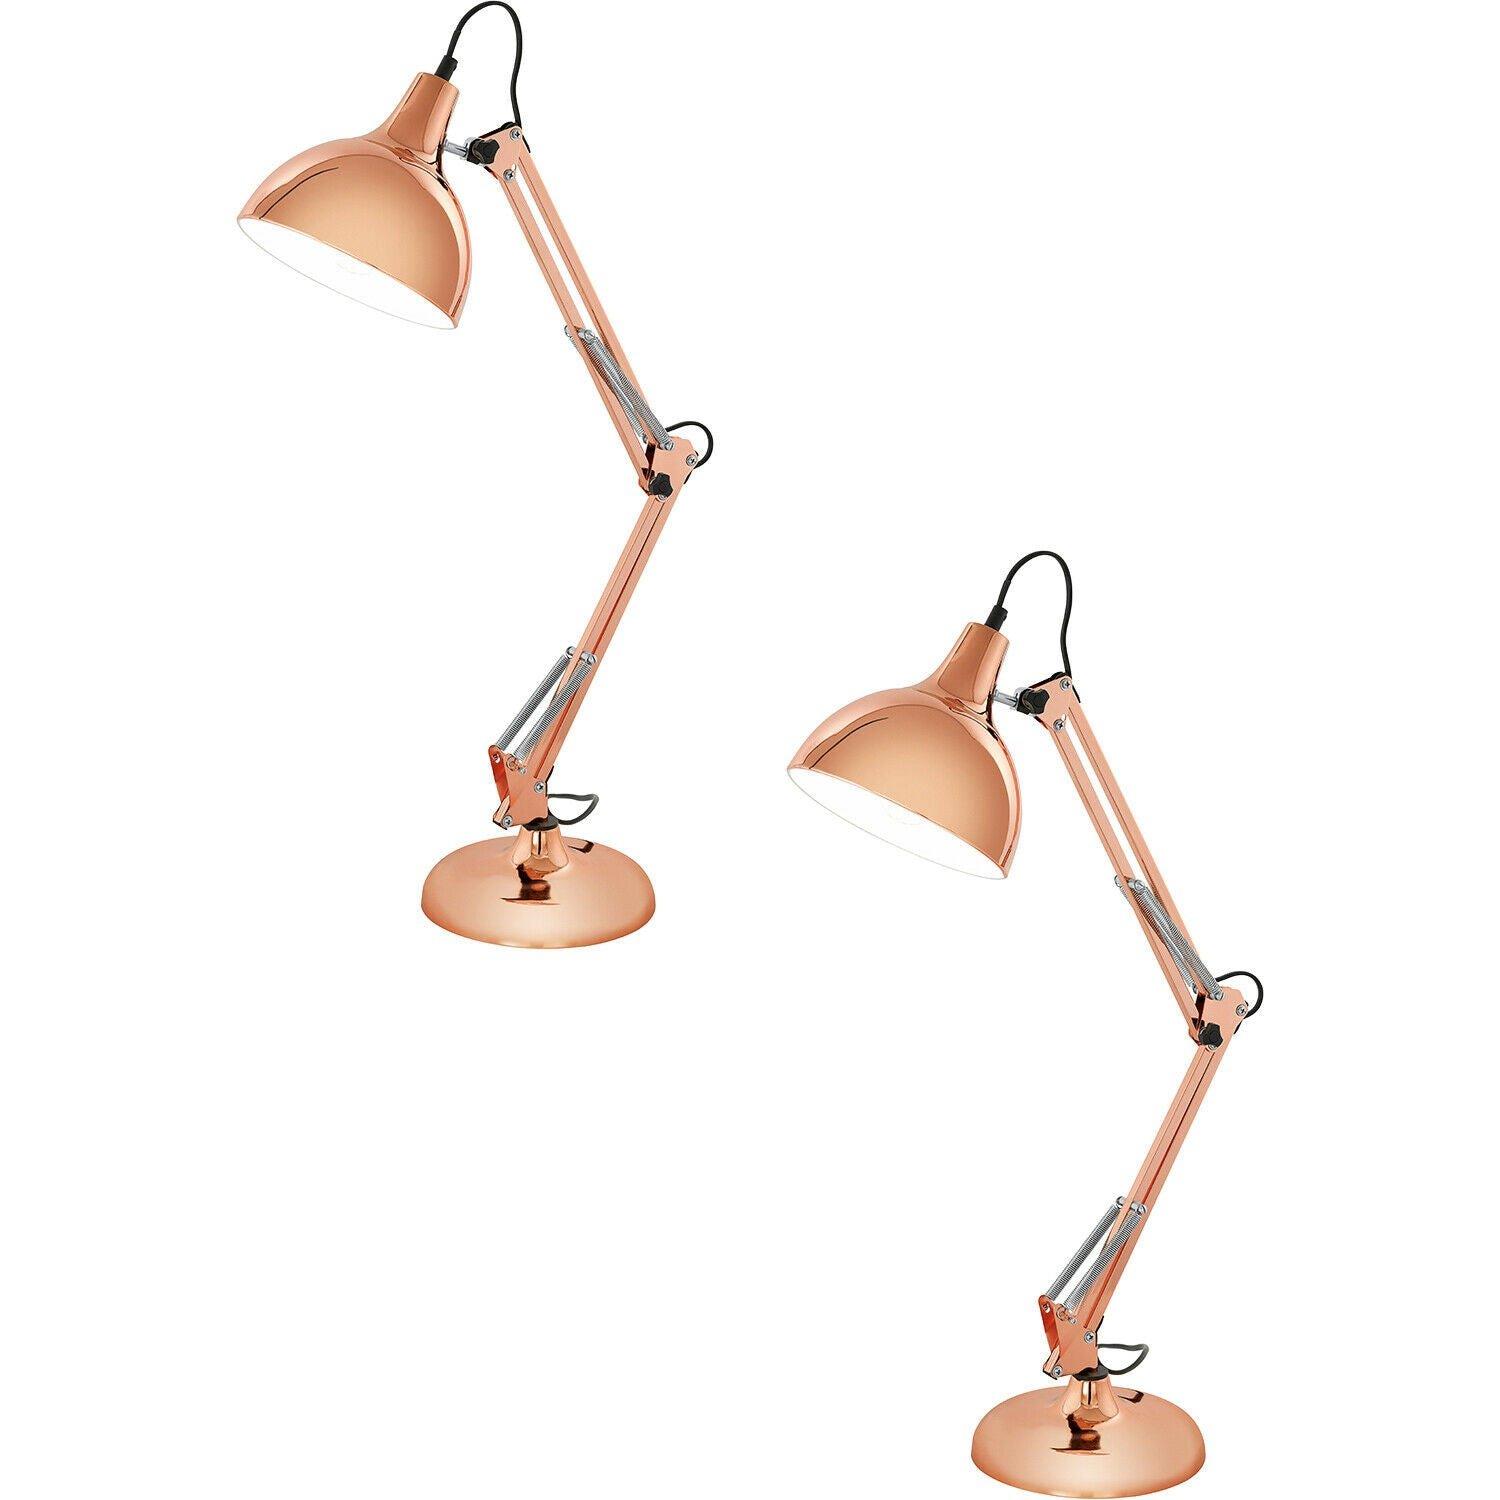 2 PACK Table Desk Lamp Colour Copper Adjustable In Line Switch Bulb E27 1x40W